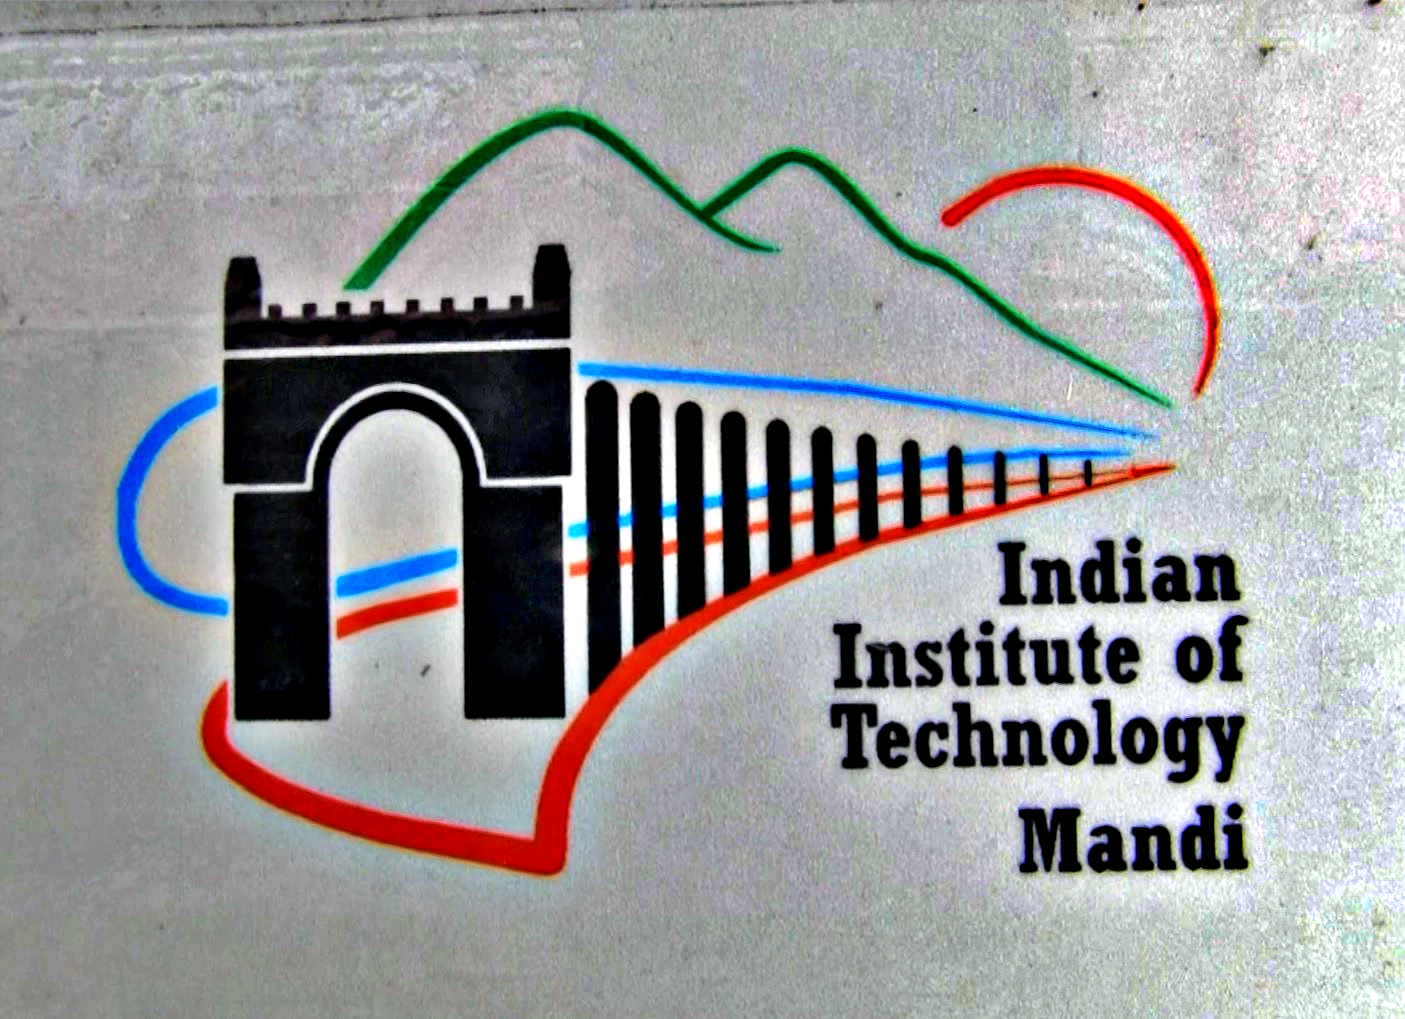 IIT Mandi signed MoU with HQ Maintenance Command Nagpur for research.